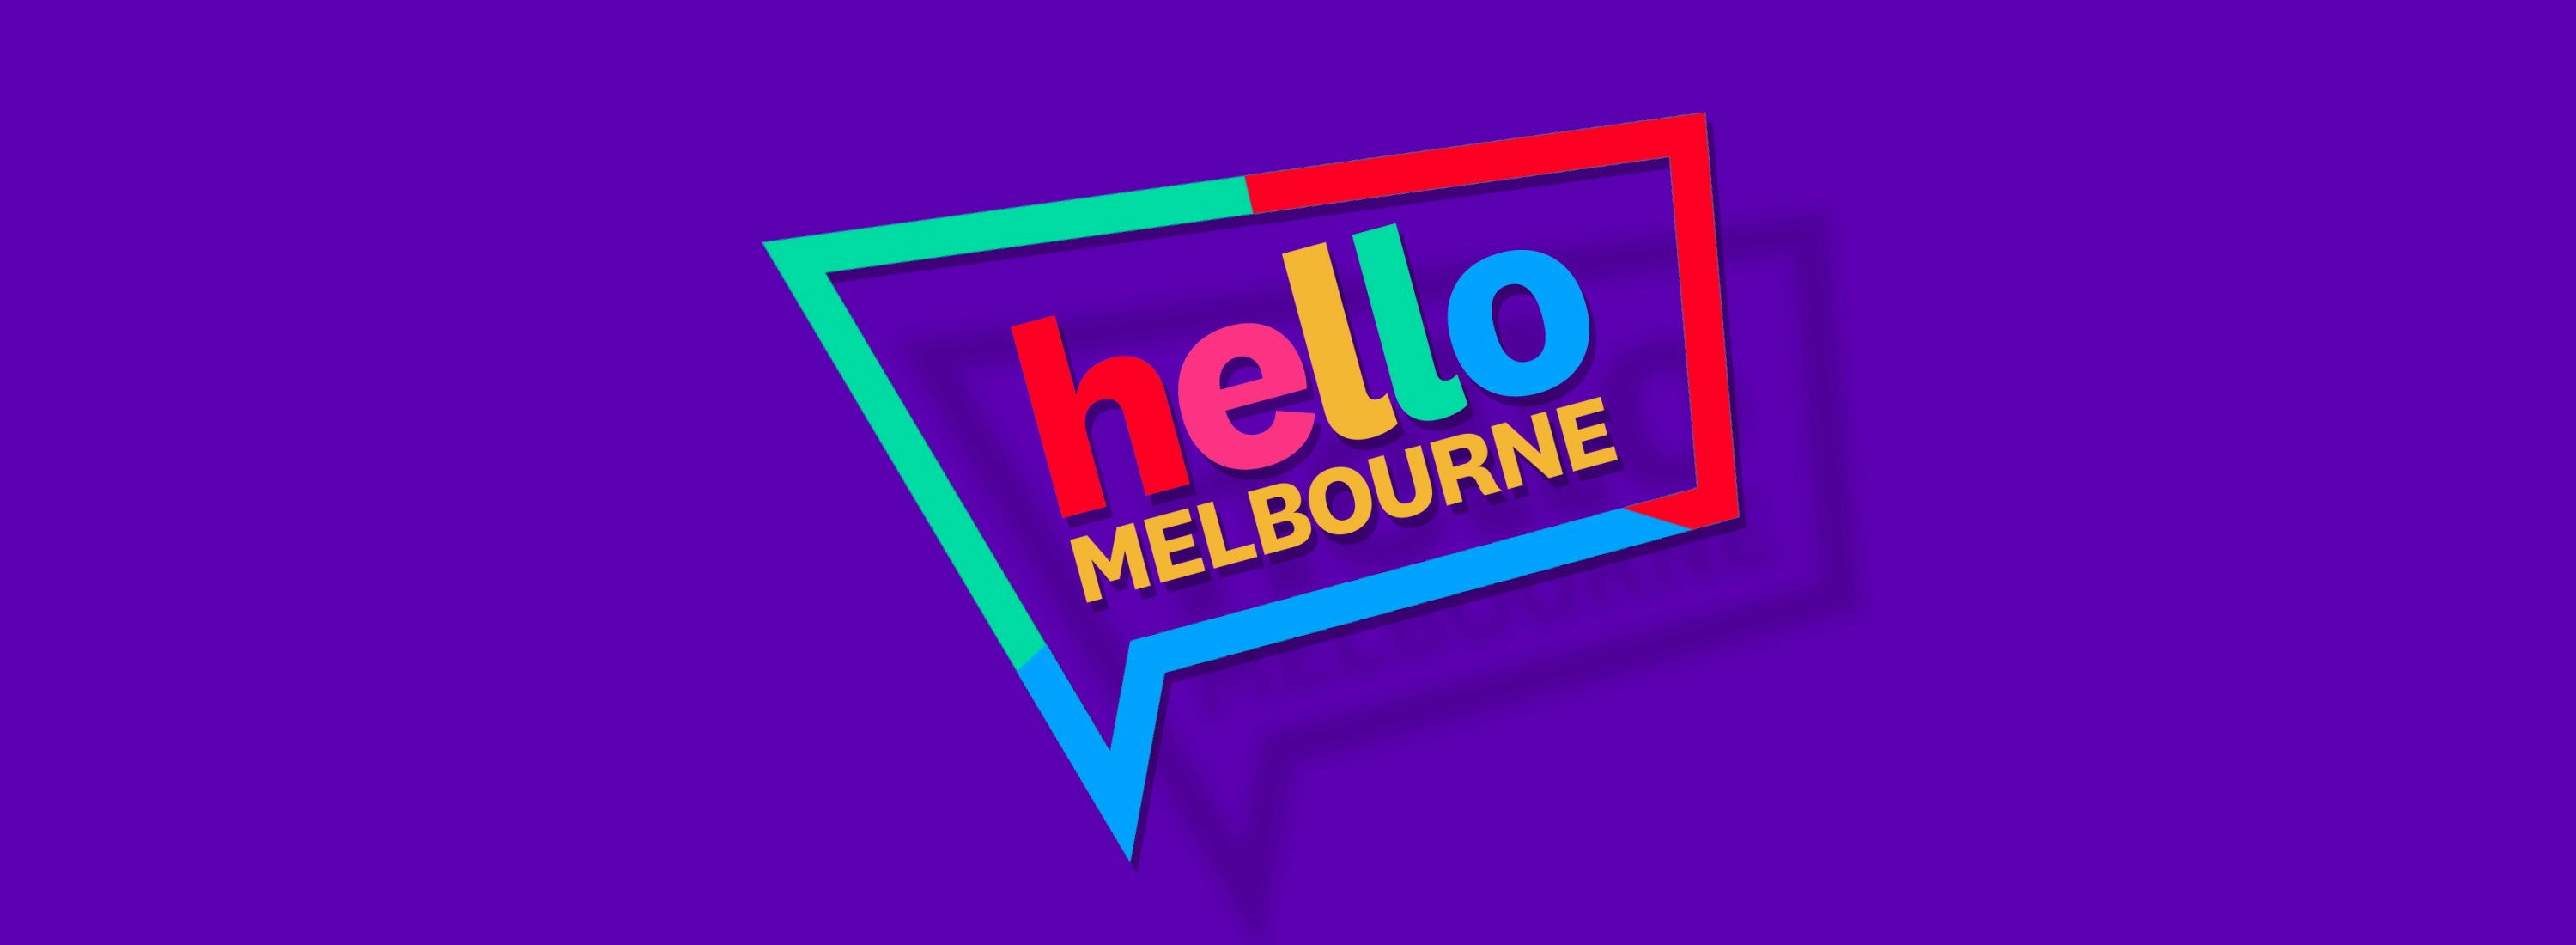 A colour talking box that says Hello Melbourne inside on a purple background